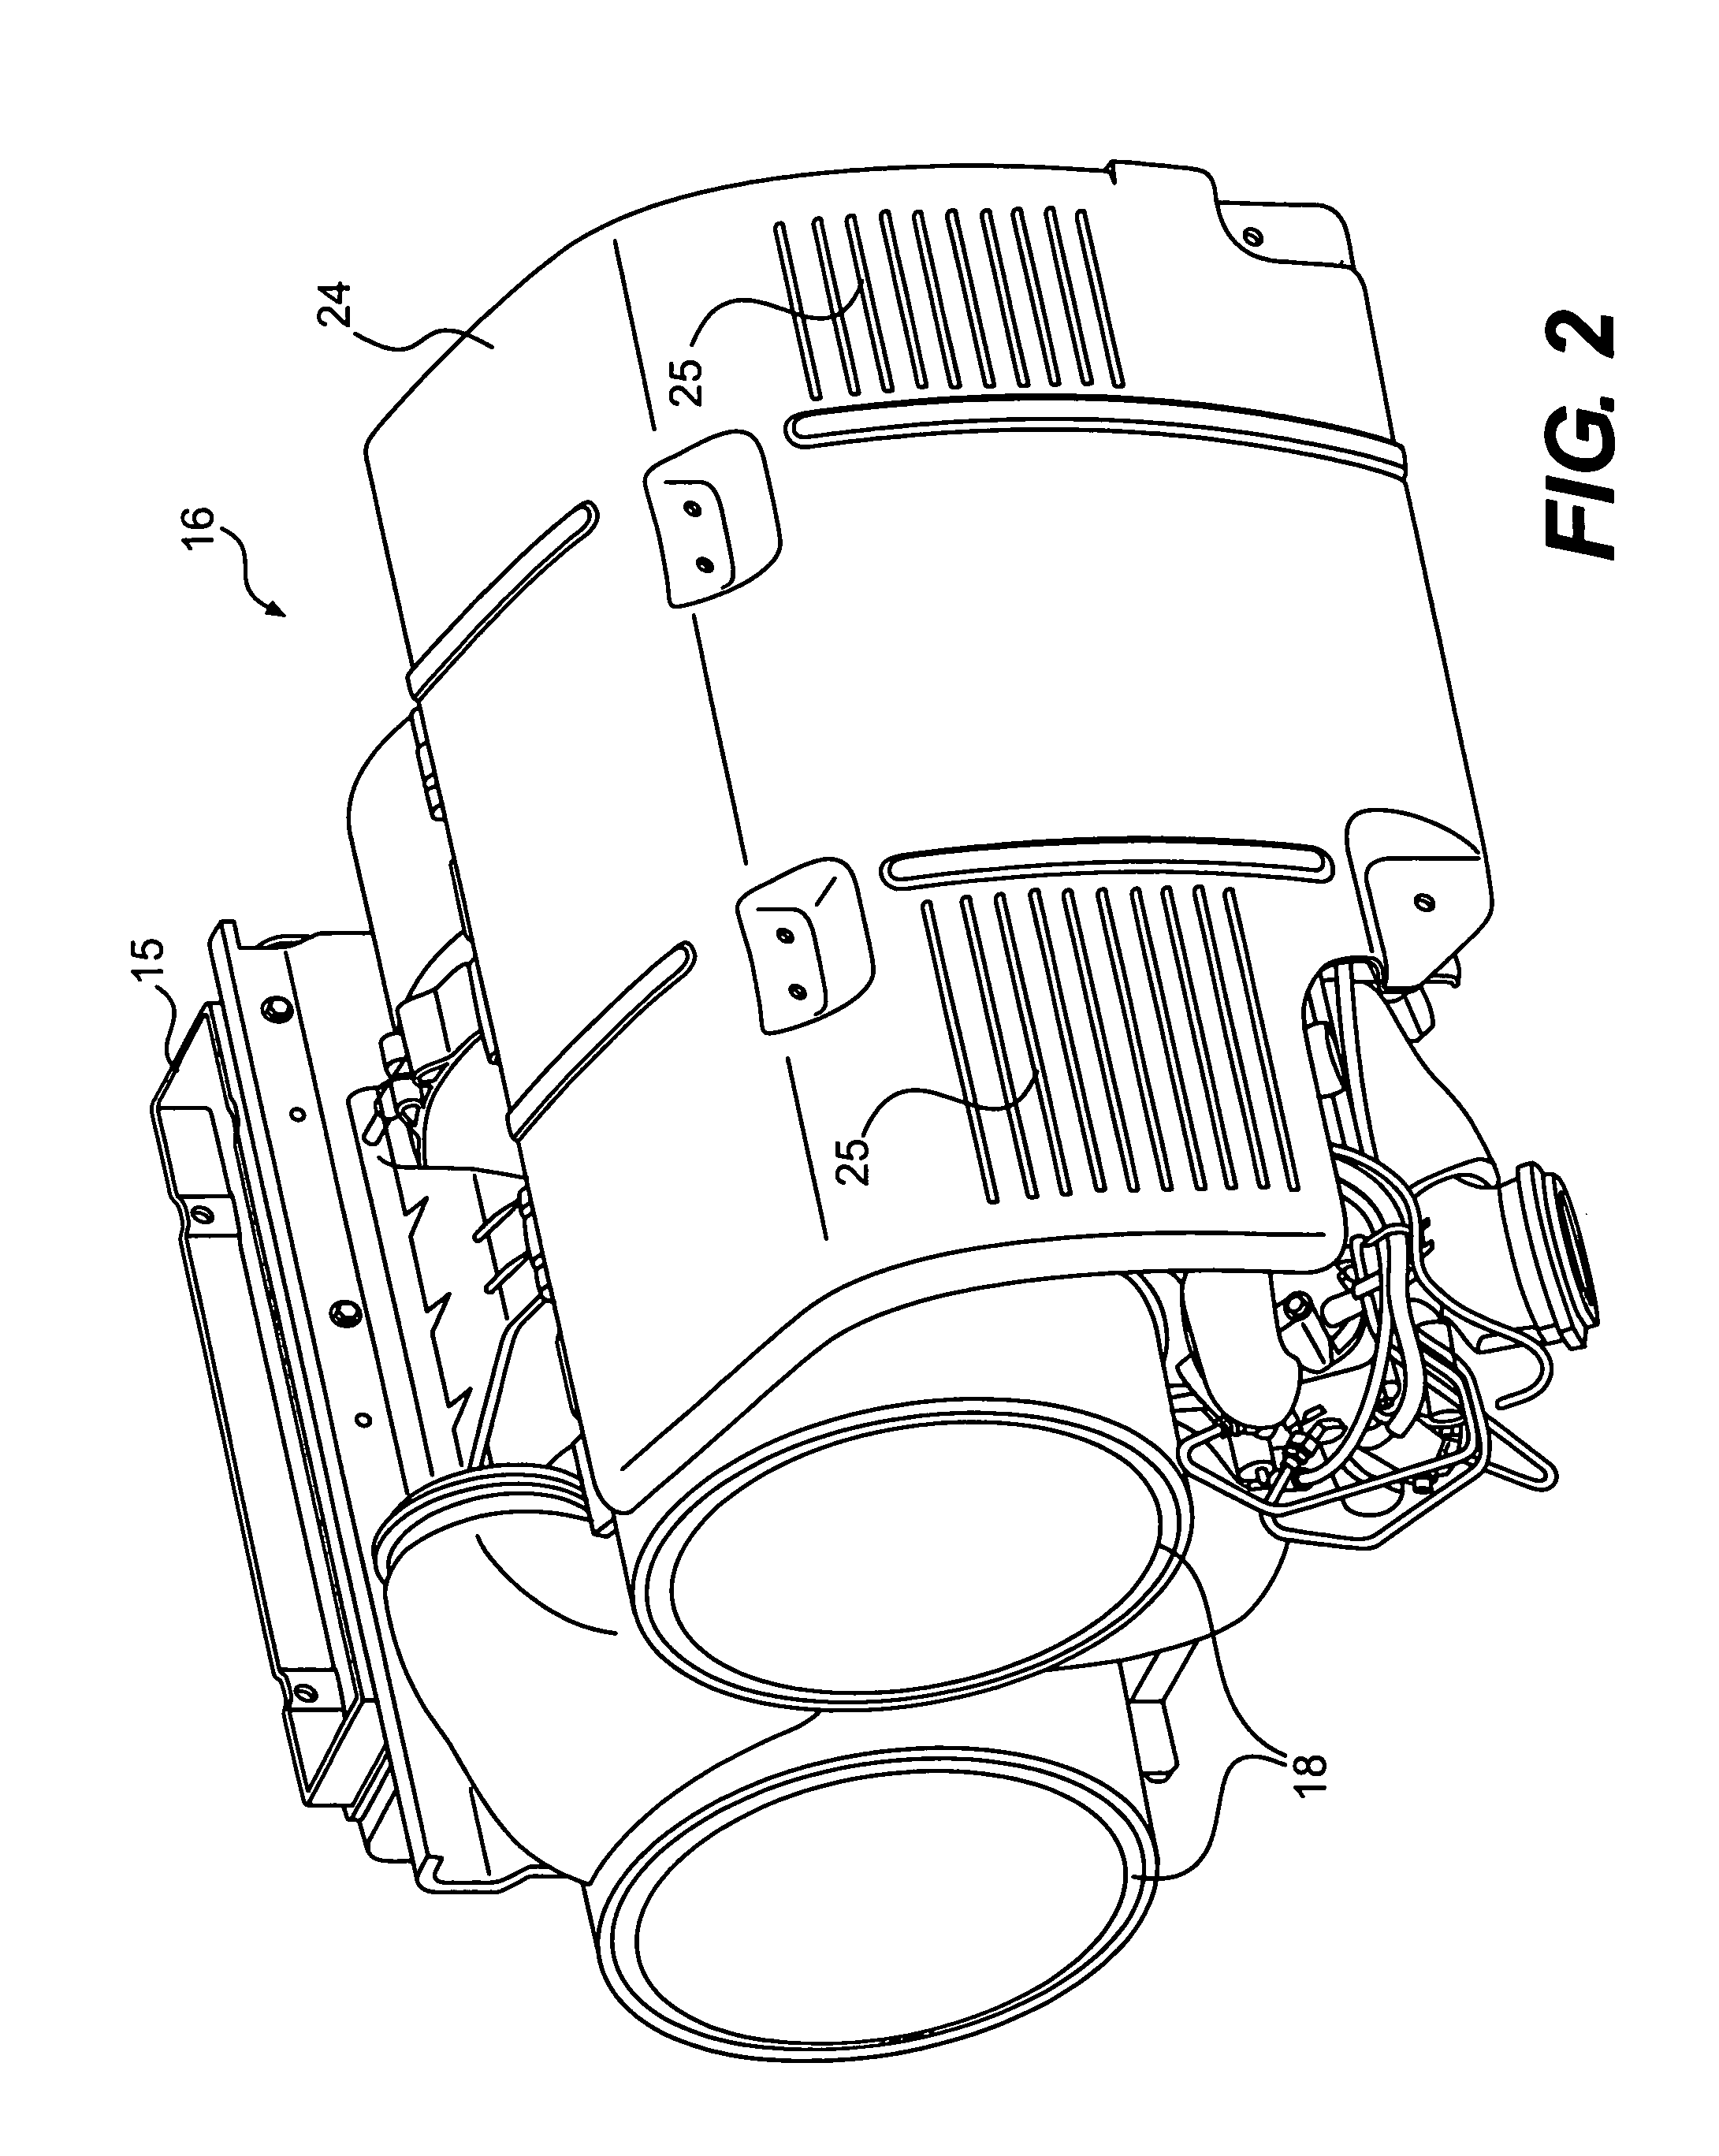 Exhaust system device with mounting bracket